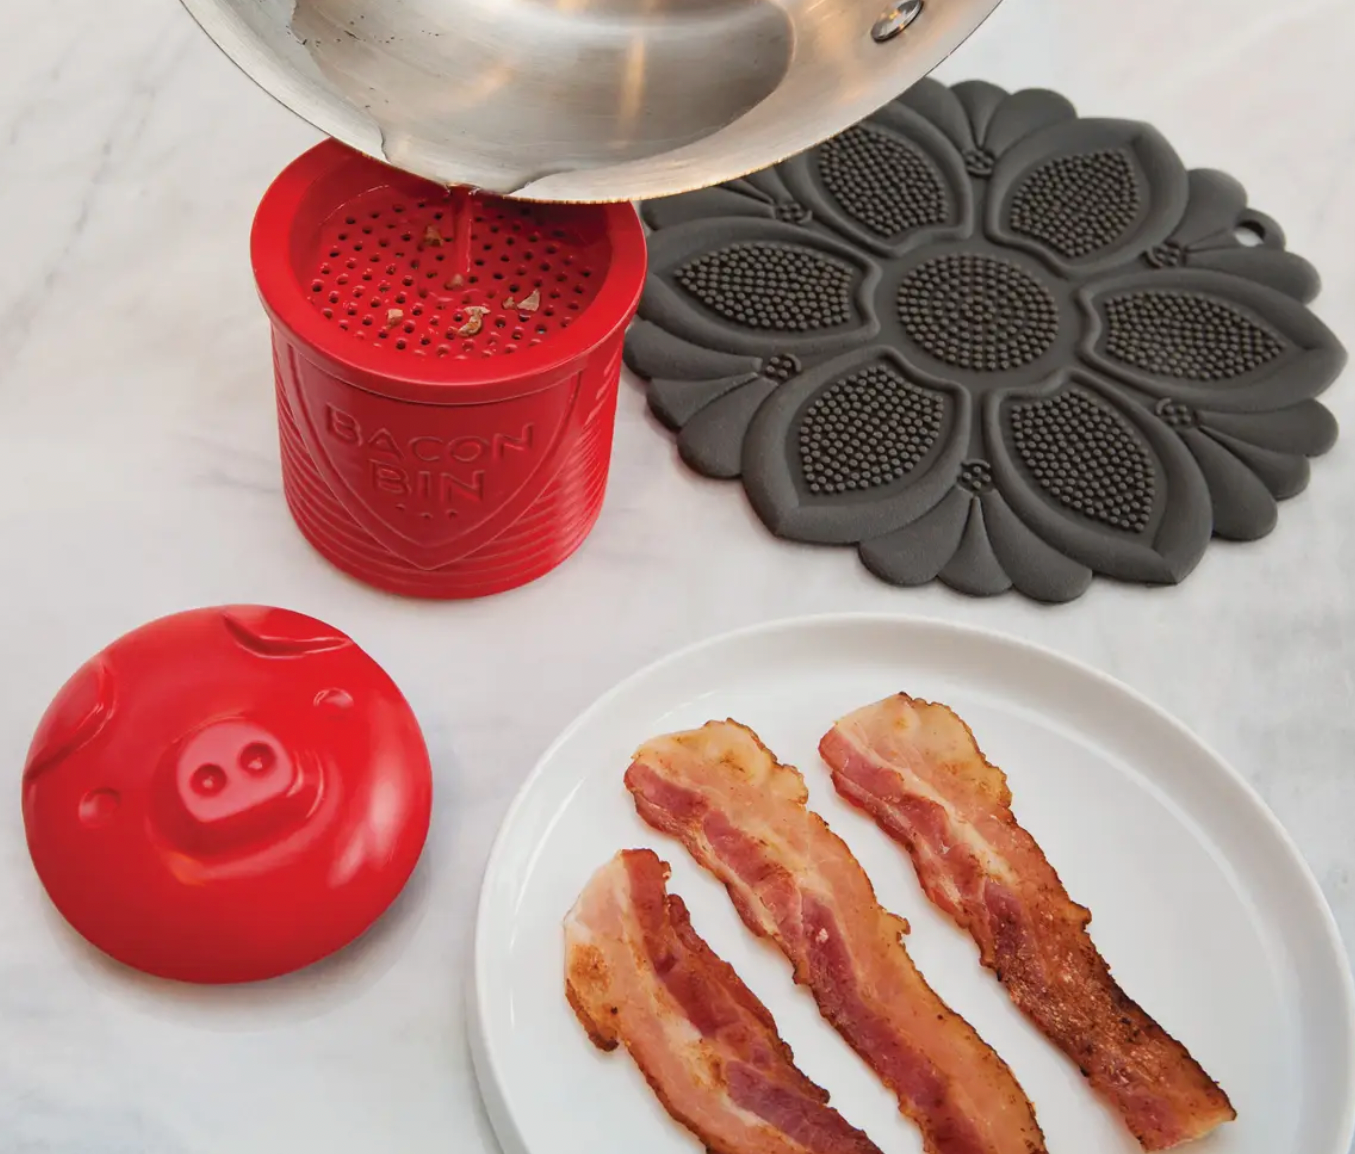 How to Store Bacon Grease